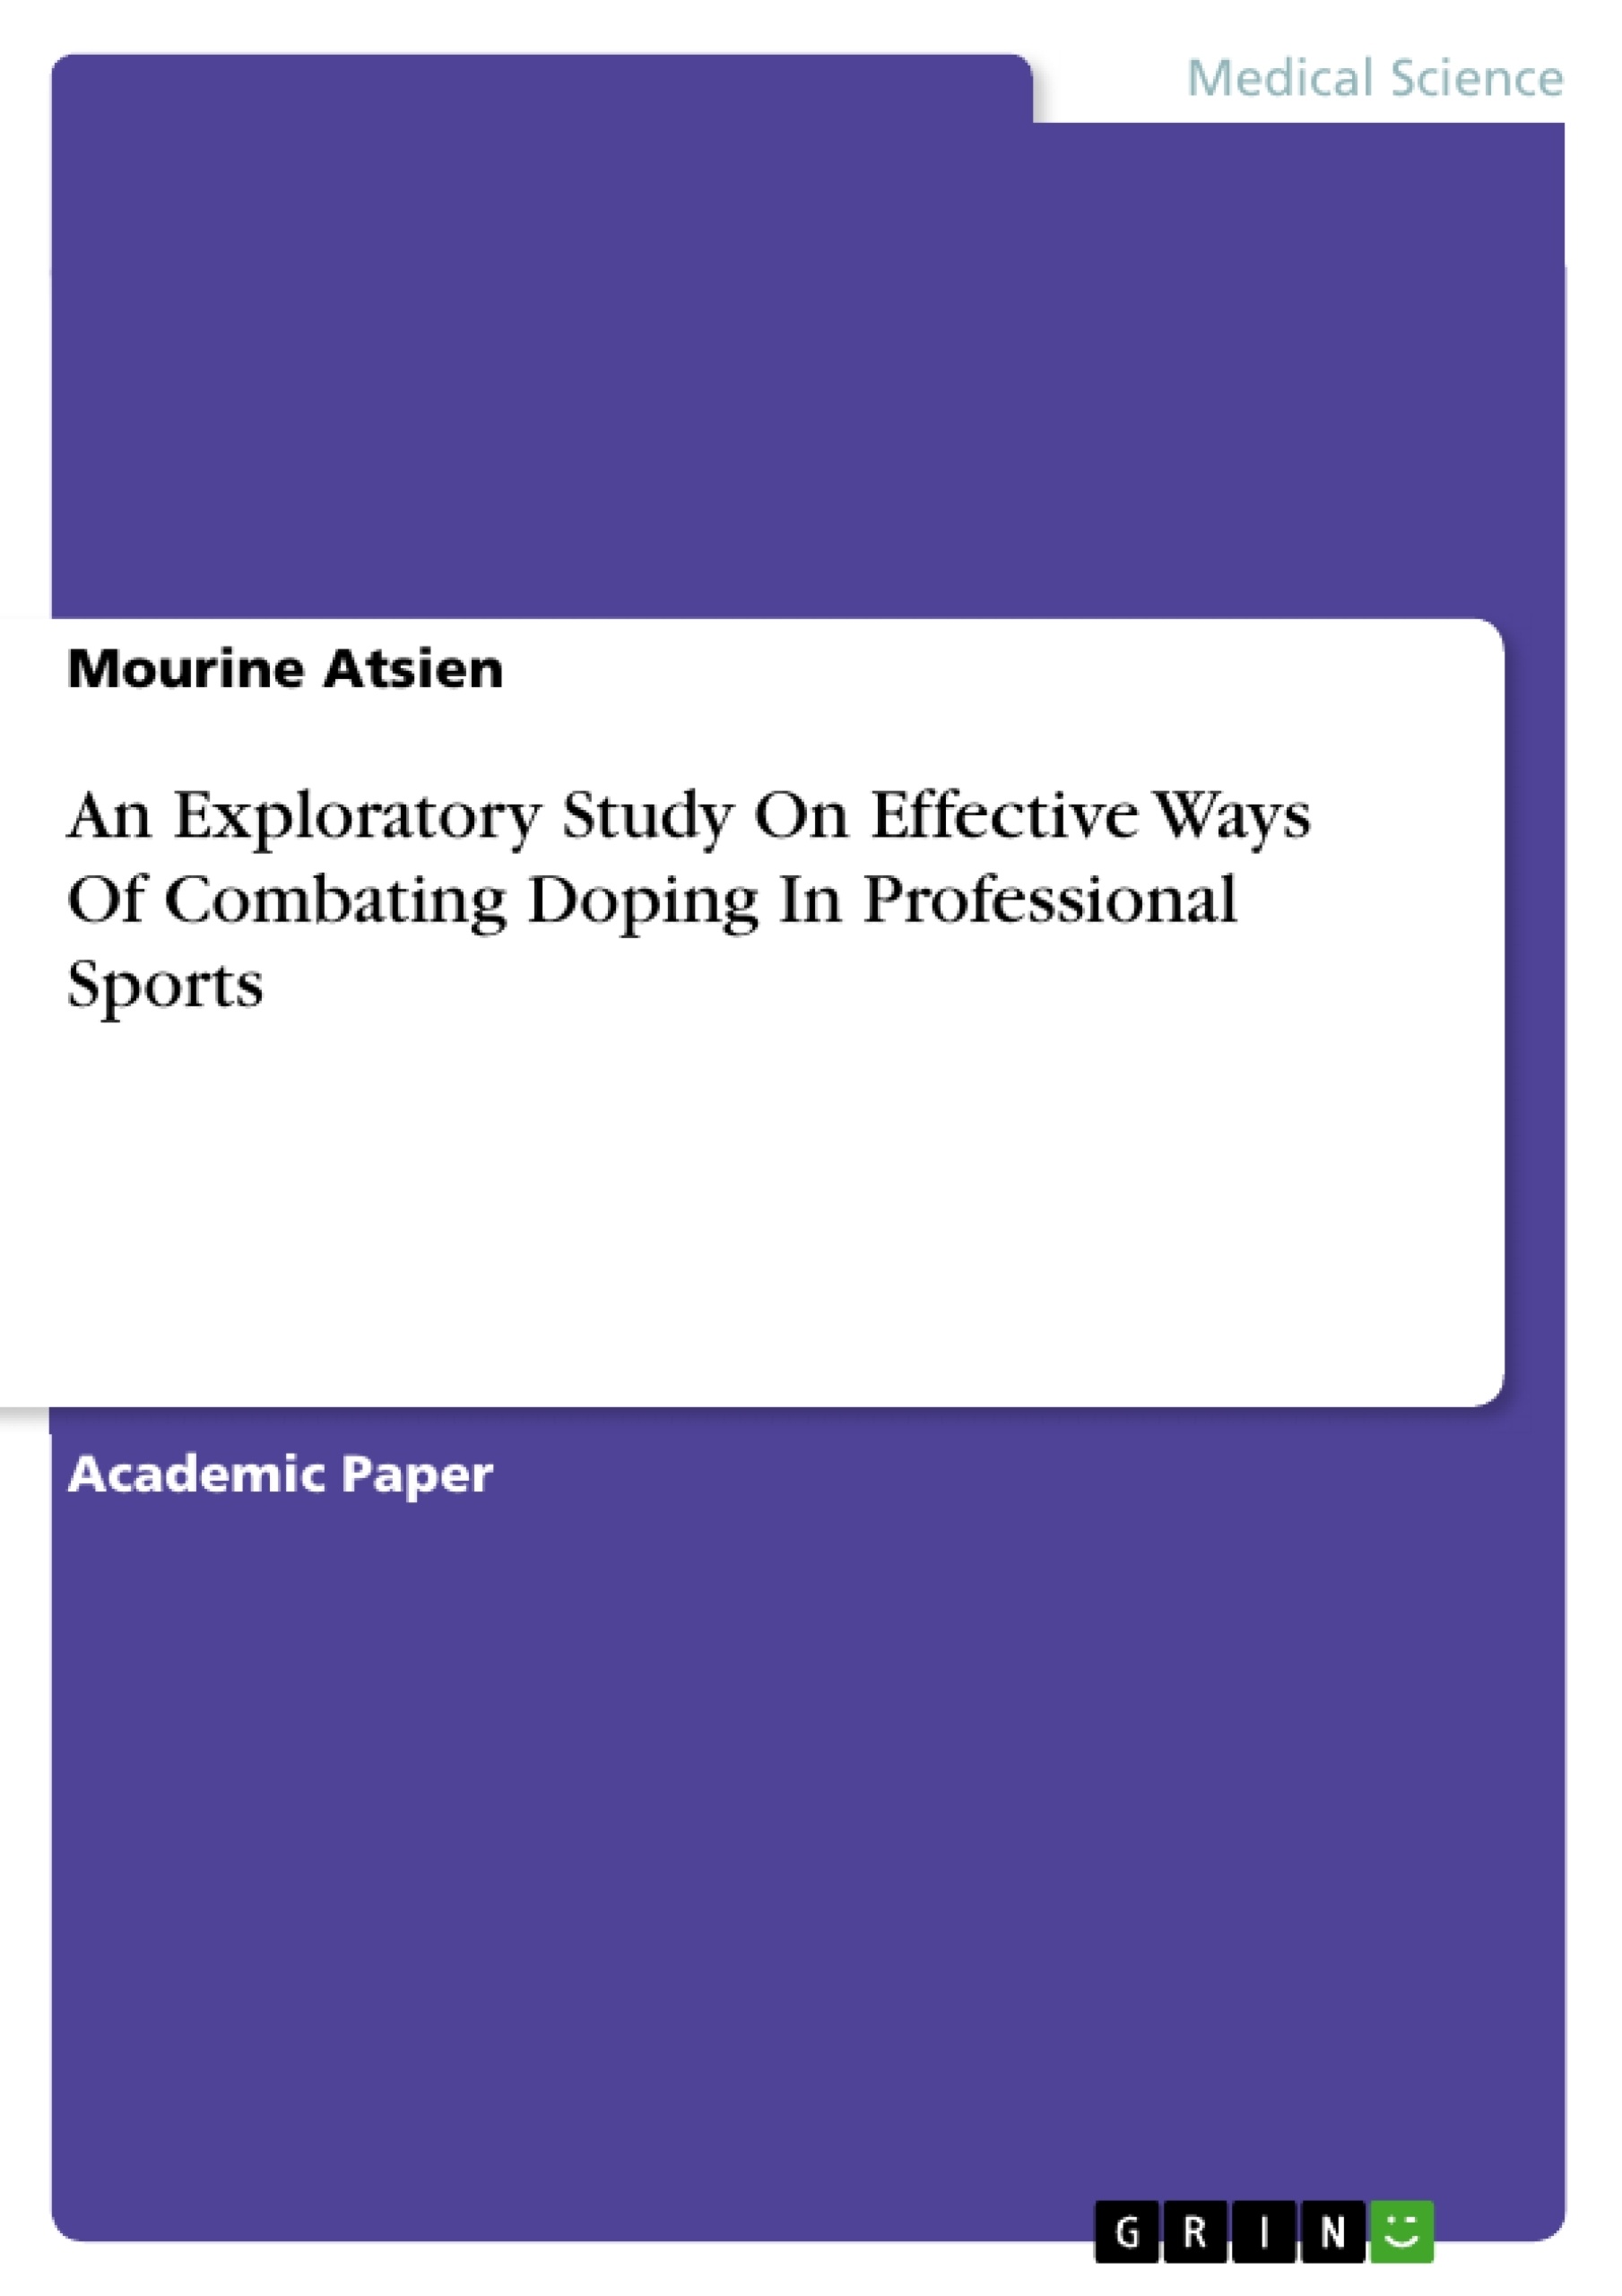 Title: An Exploratory Study On Effective Ways Of Combating Doping In Professional Sports